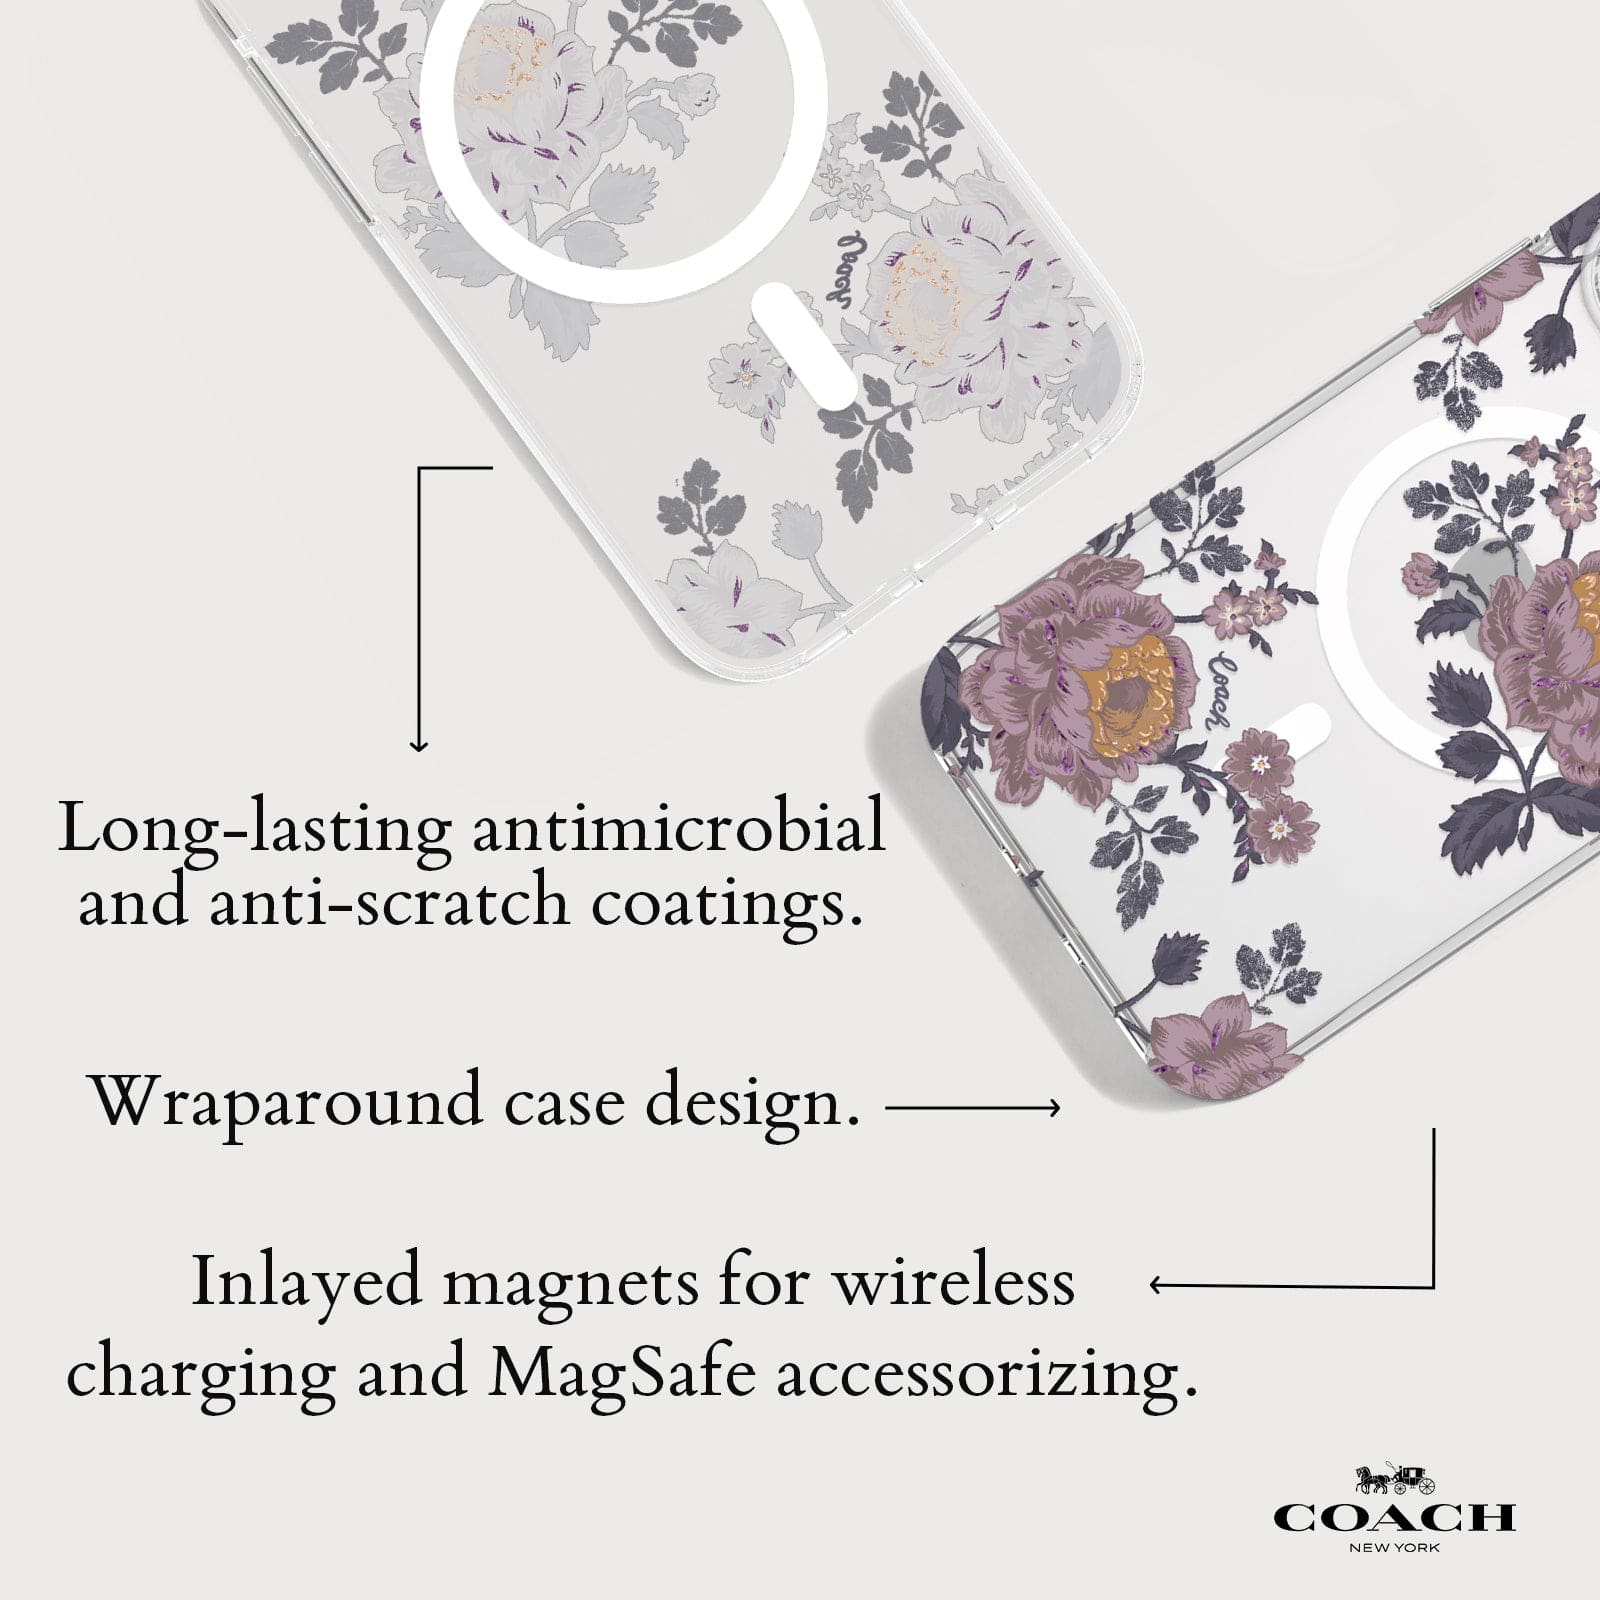 LONG-LASTING ANTIMICROBIAL AND ANTI SCRATCH COATINGS. WRAPAROUND CASE DESIGN. INLAYED MAGNETS FOR WIRELESS CHARGING AND MAGSAFE ACCESSORIZING